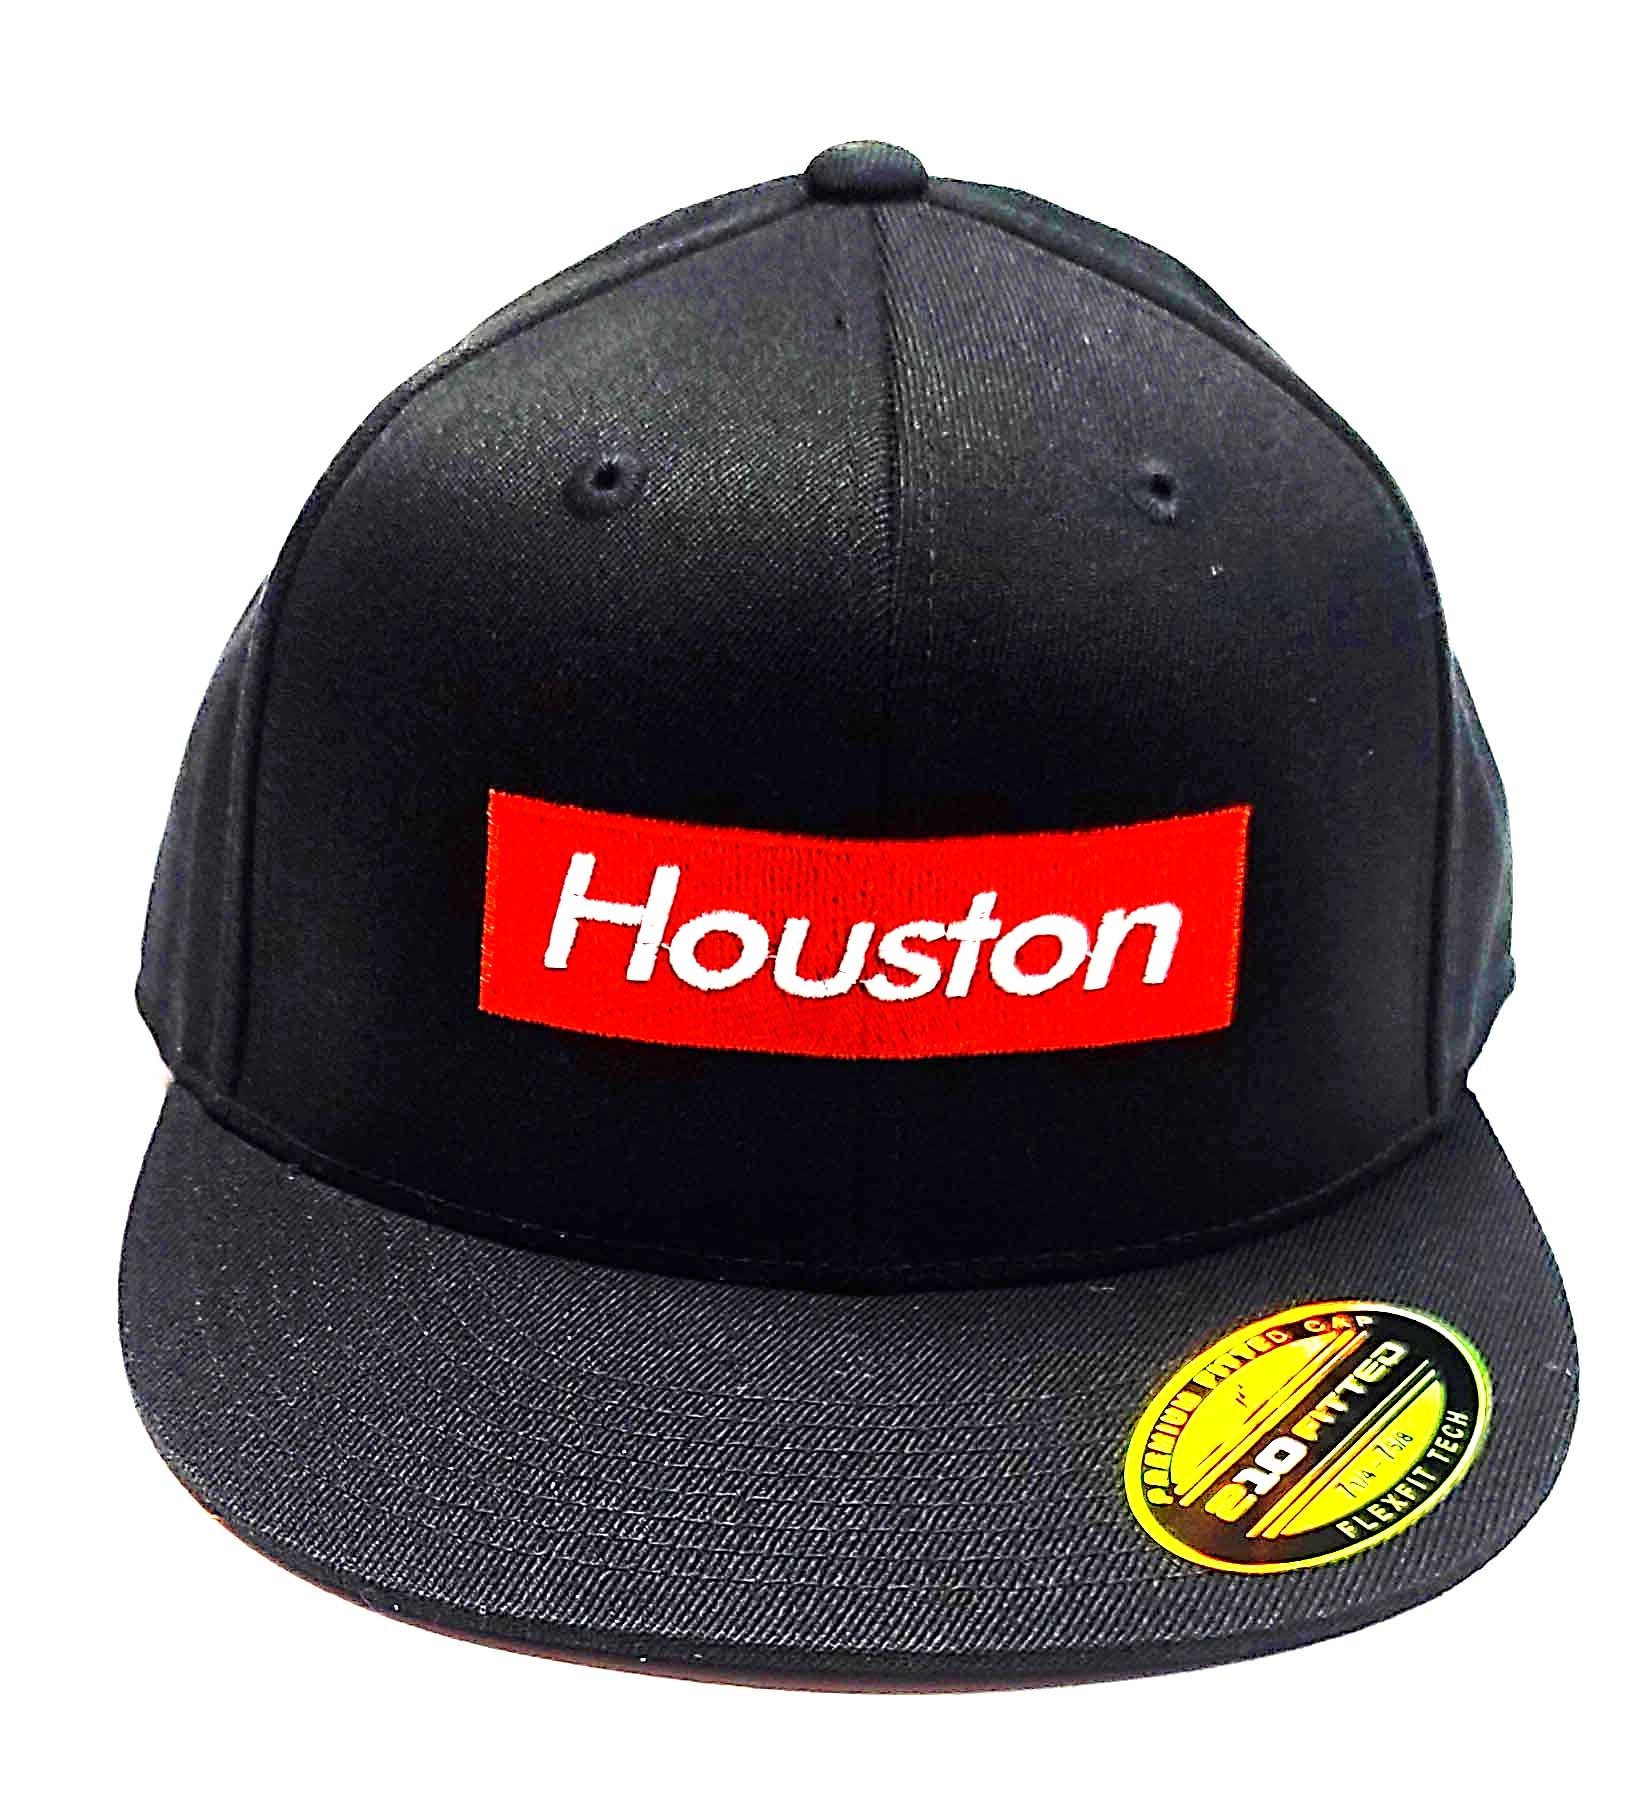 Houston Supreme logo on a Flexfit 6210 semi fitted cap front view